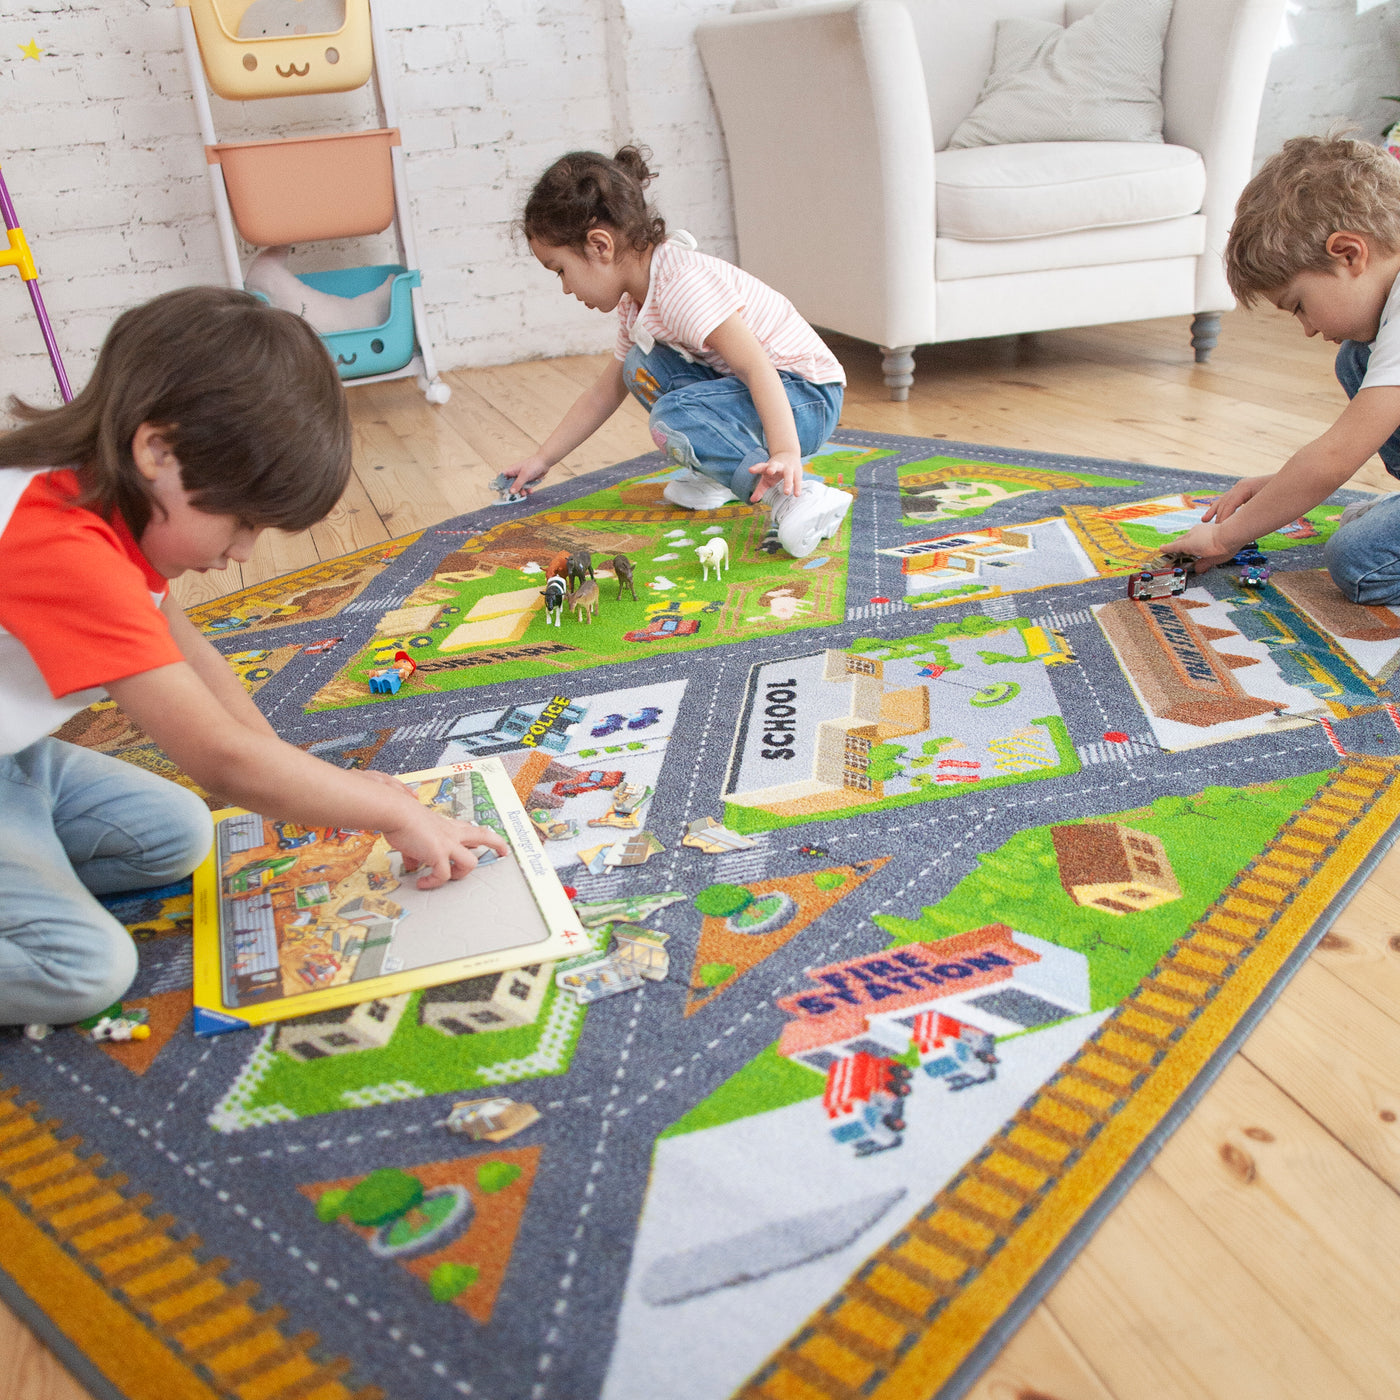 KC CUBS Road Play Map City Car Vehicle Traffic Educational Learning & Fun Game Area Non Slip Boy & Girl Kids Rug Carpet for Children Bedroom, Toddler Classroom & Baby Playroom Mat, Playtime Activity